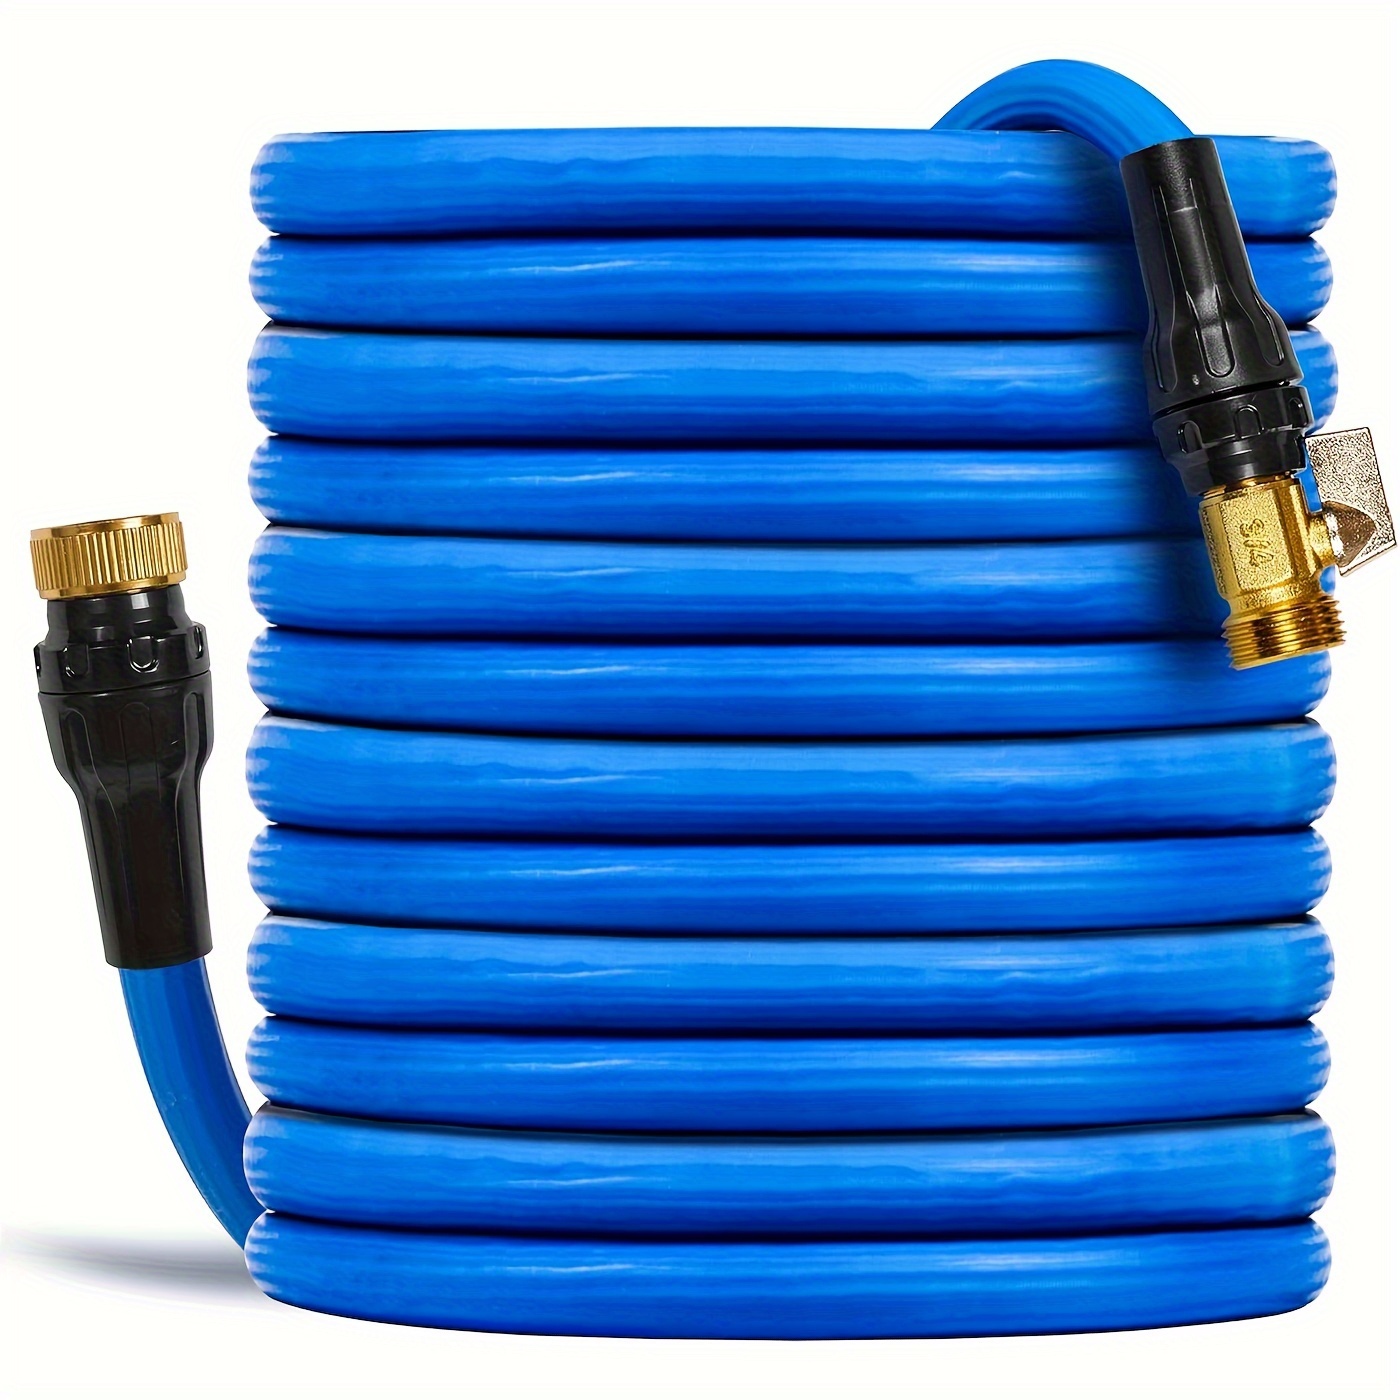 

Expandable Garden Hose 50ft/100ft, 2024 New Patented Water Hose 3-layer Latex Core, With Reusable 3/4" Solid Brass Connectors, Leak-proof, Lightweight, Durable Best For Watering And Washing (blue)